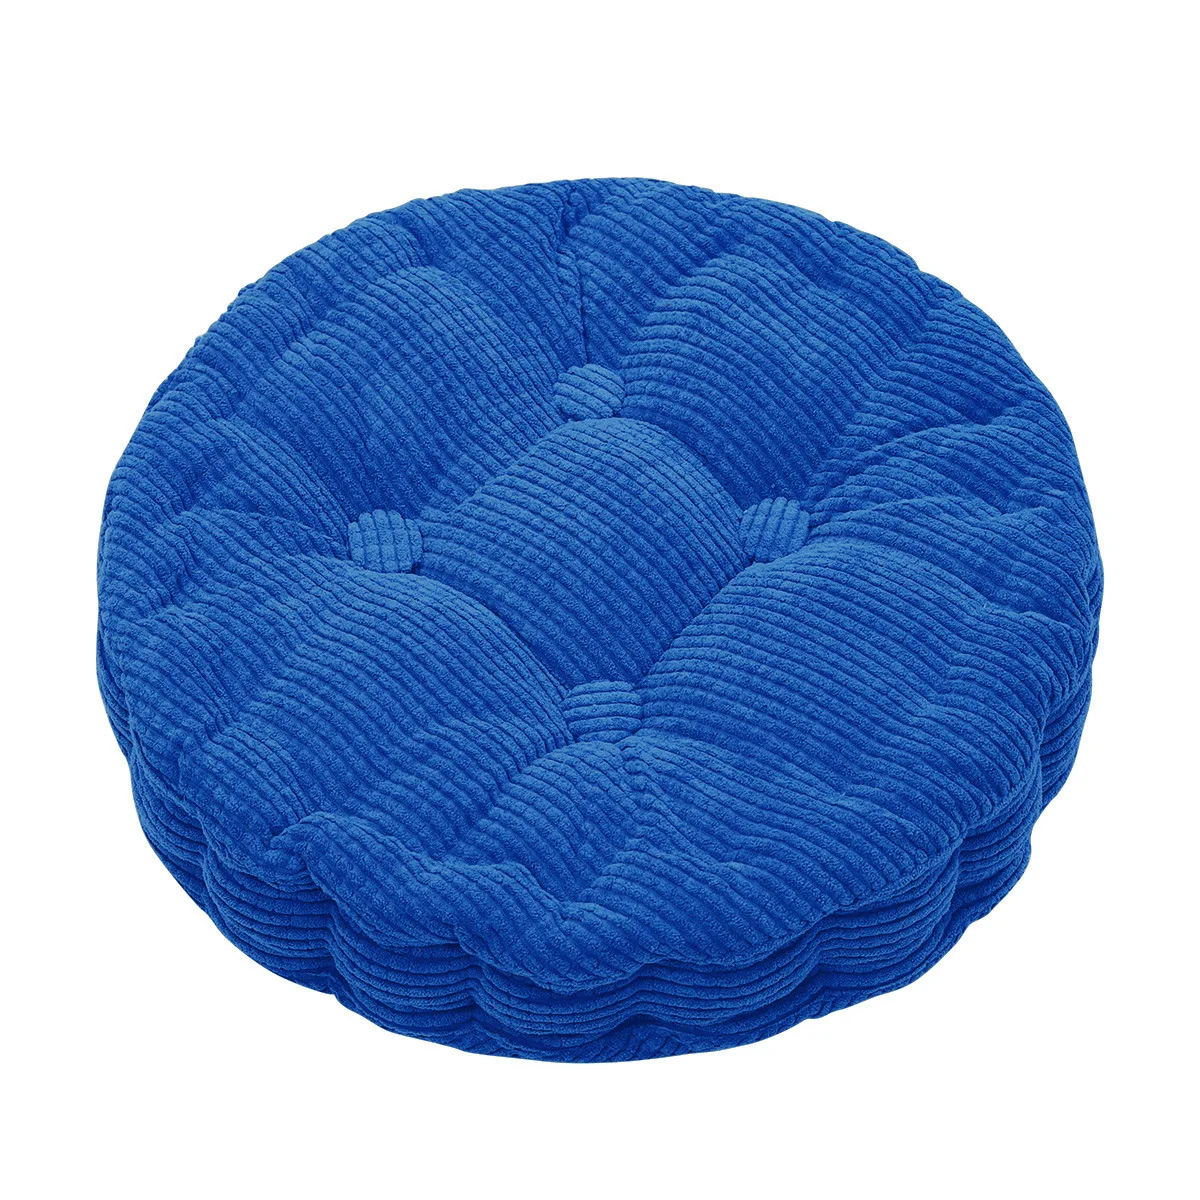 Thicken Square Corncob Tatami Seat Office Chair Seat Cushion Soft Sofa Cushion for Home Floor Decor Textile Knee Pillow 